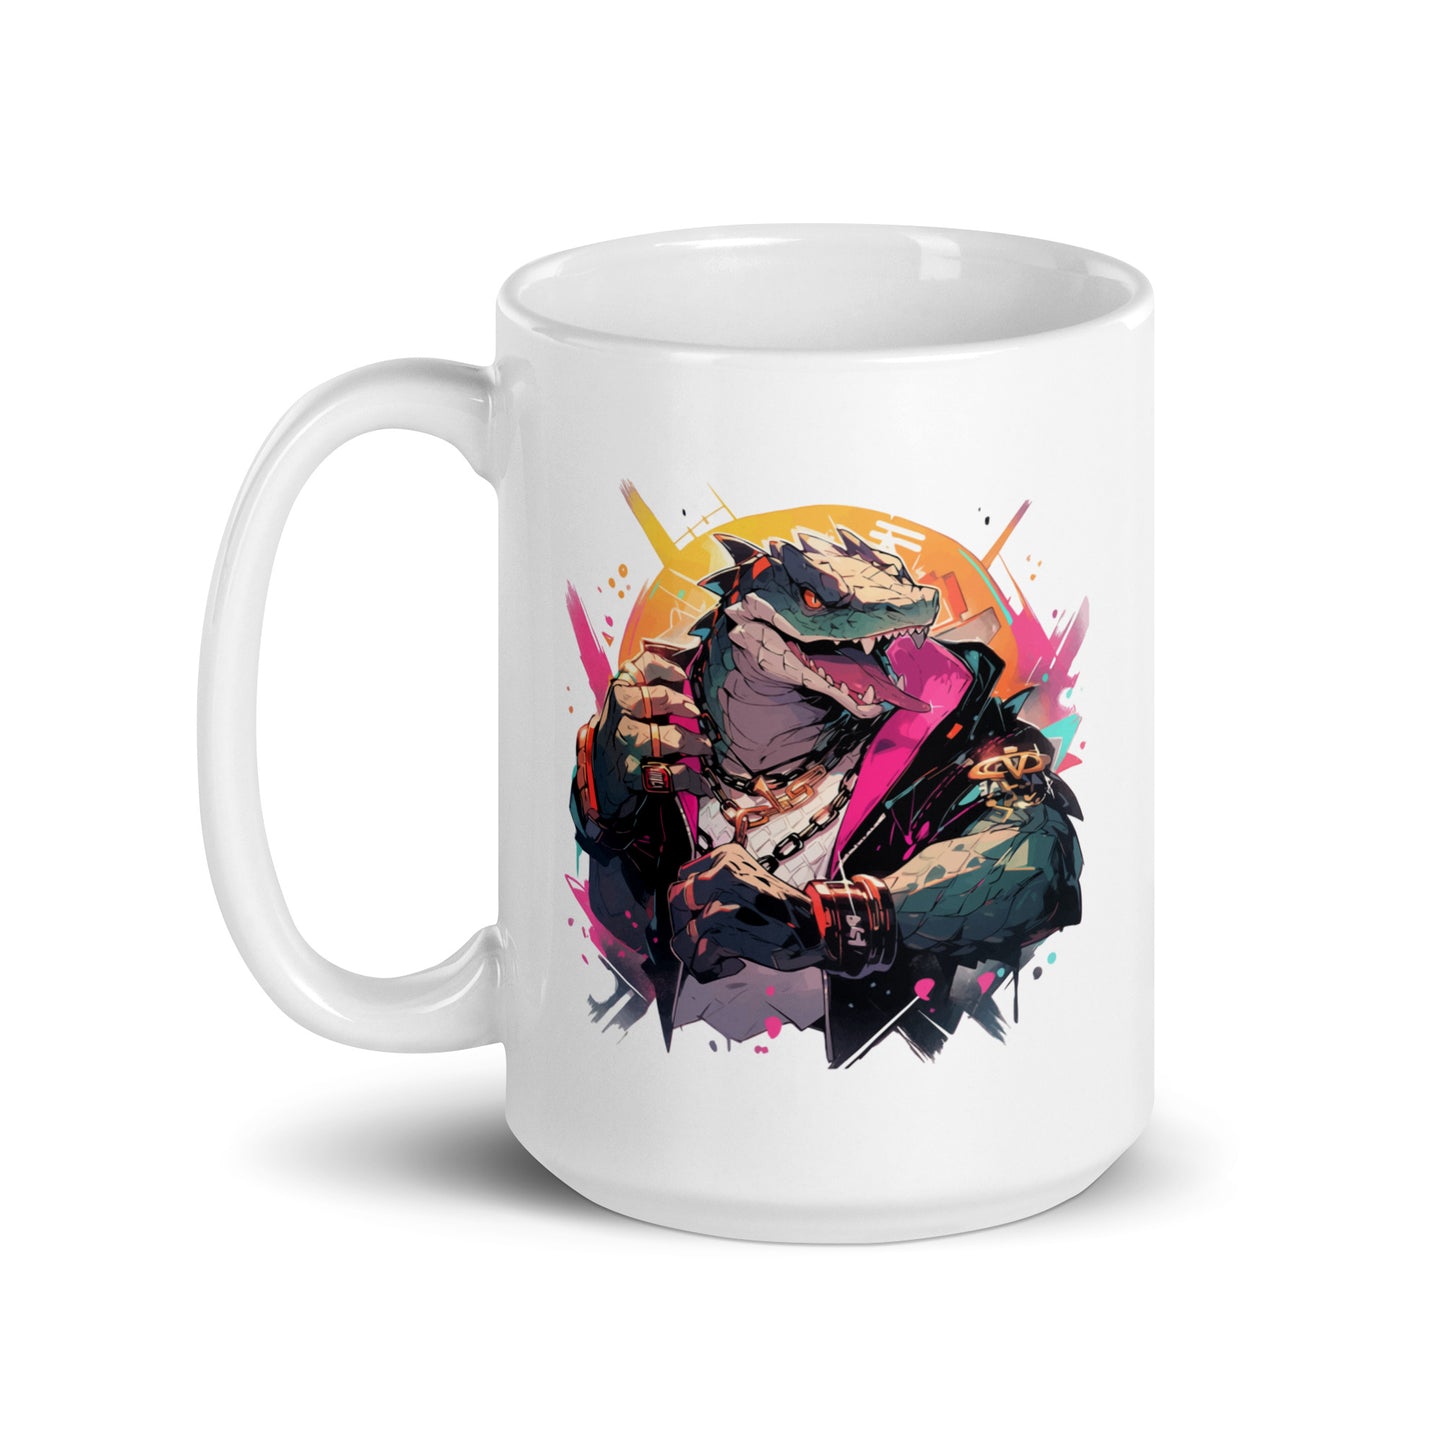 Dangerous and influential reptile, Stylish and rich dino boss bandit, Sharp dragon teeth, Gangster dinosaur and fist fight - White glossy mug